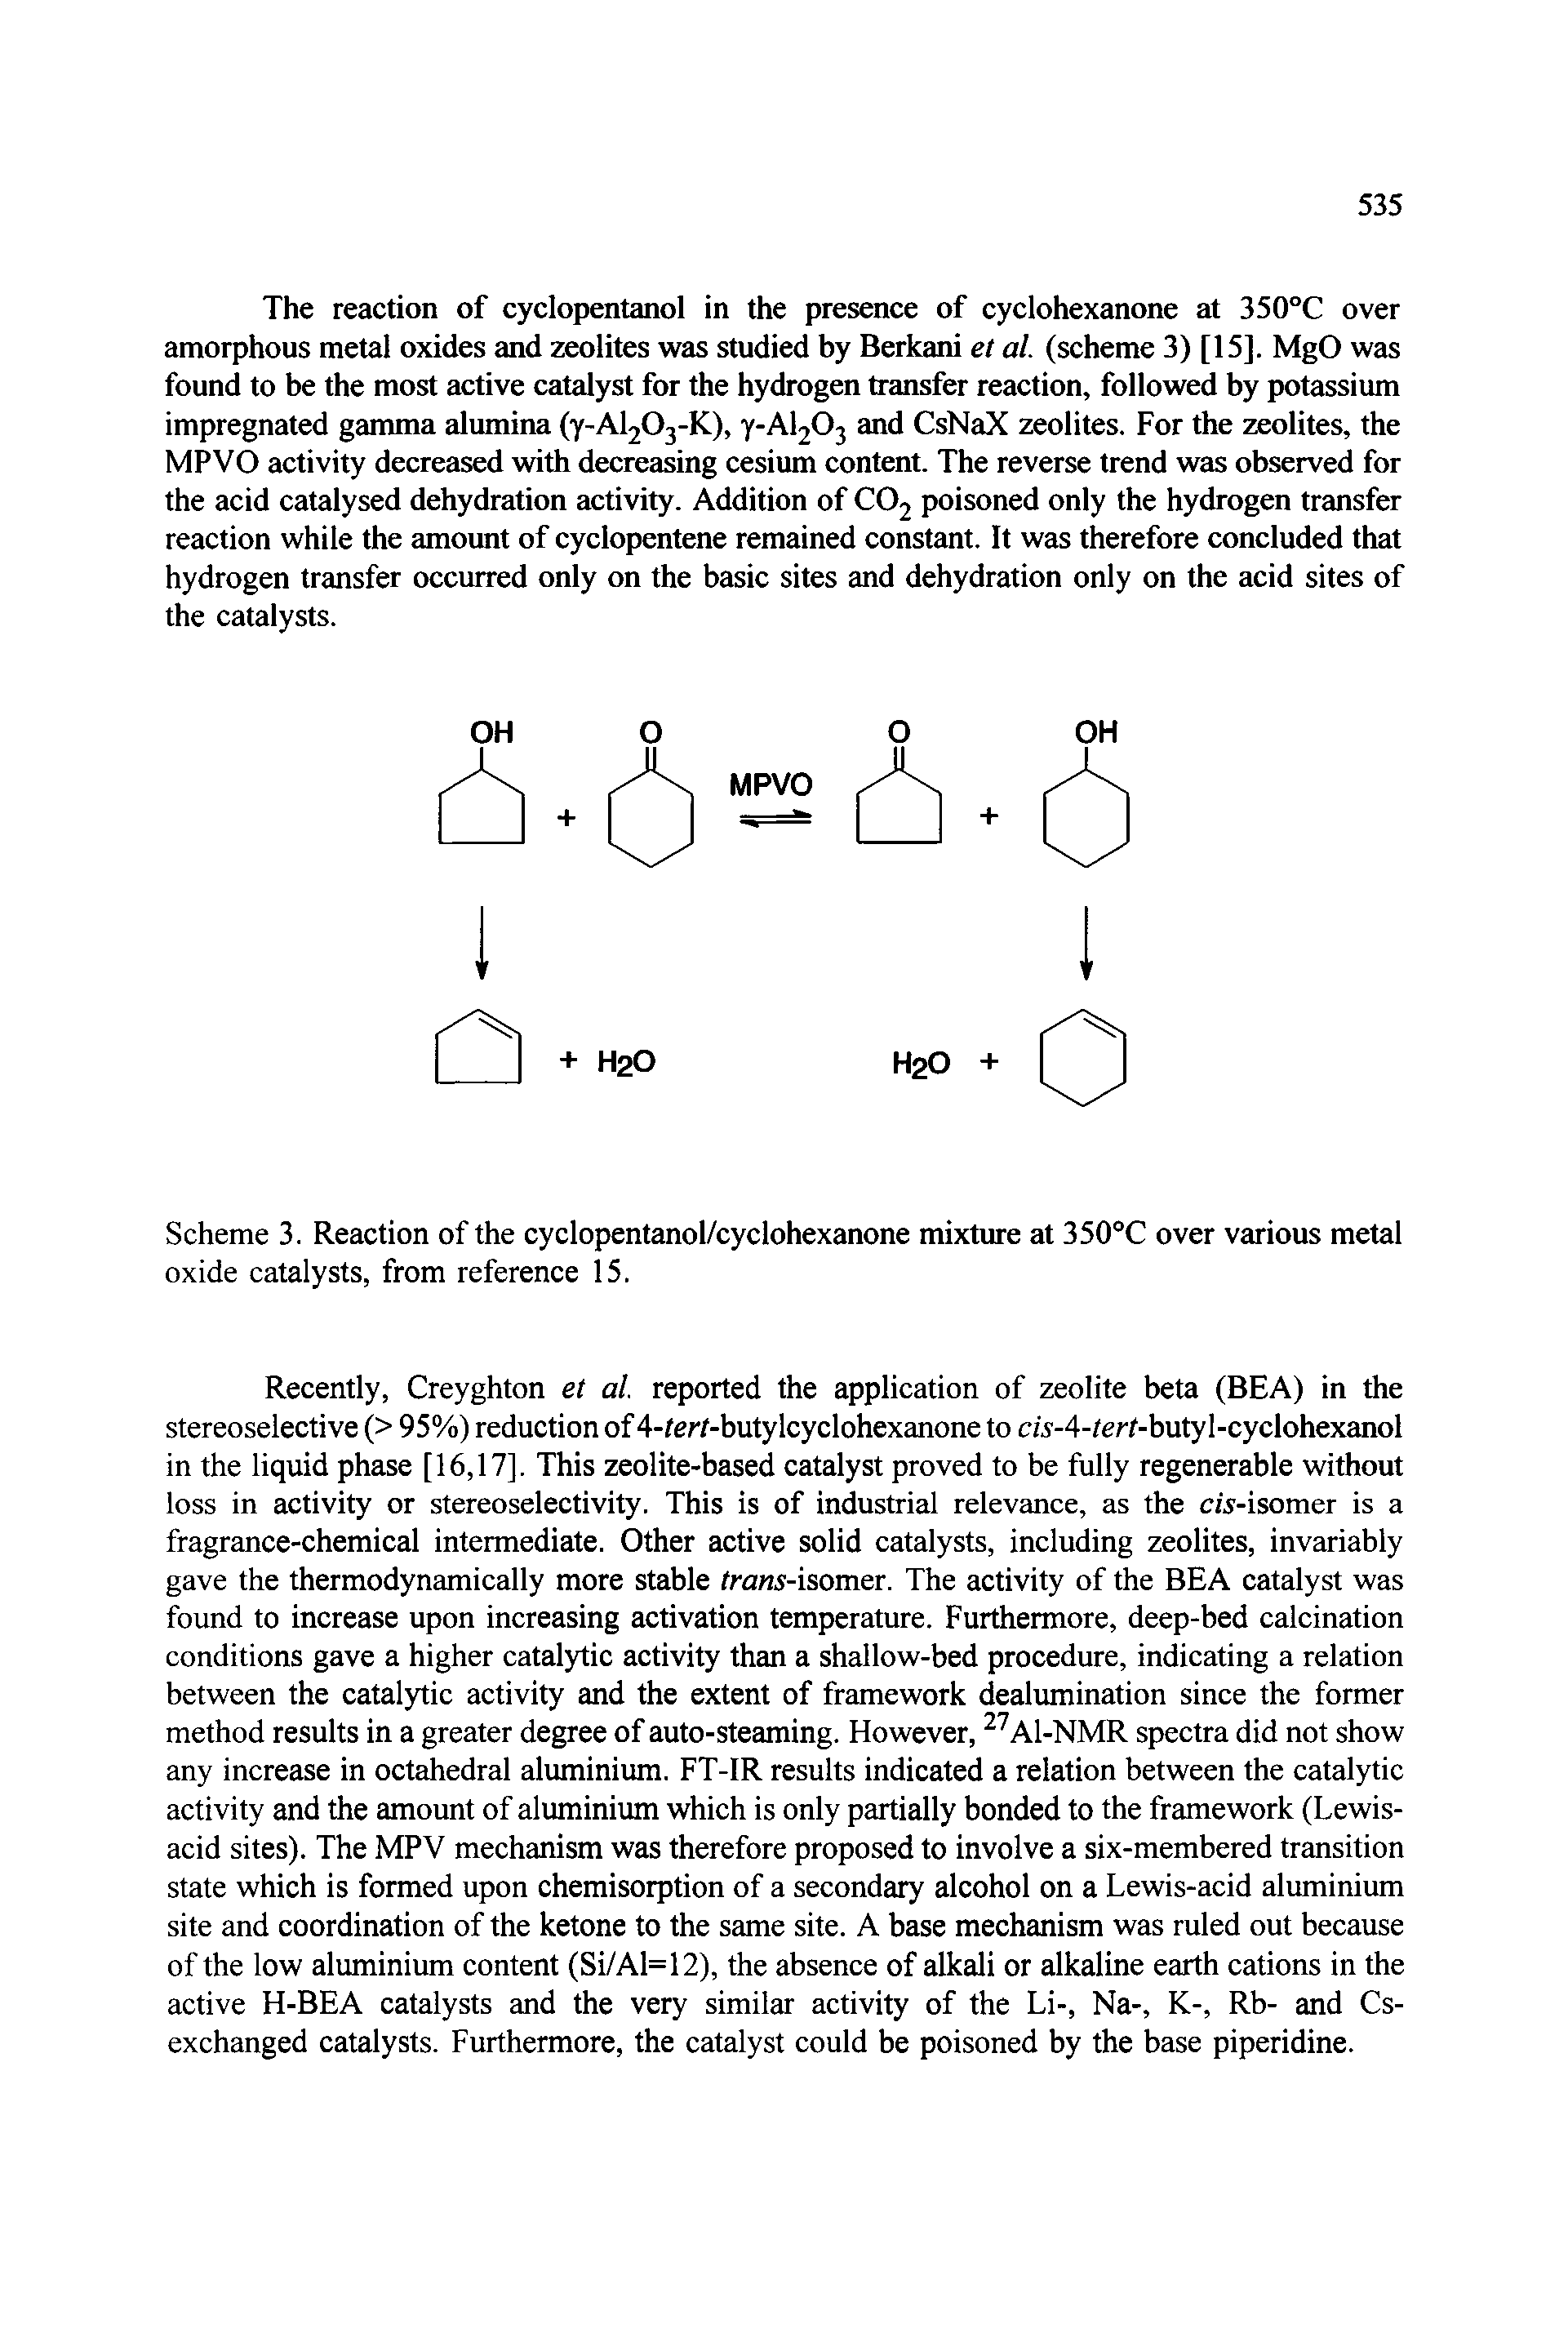 Scheme 3. Reaction of the cyclopentanol/cyclohexanone mixture at 350°C over various metal oxide catalysts, from reference 15.